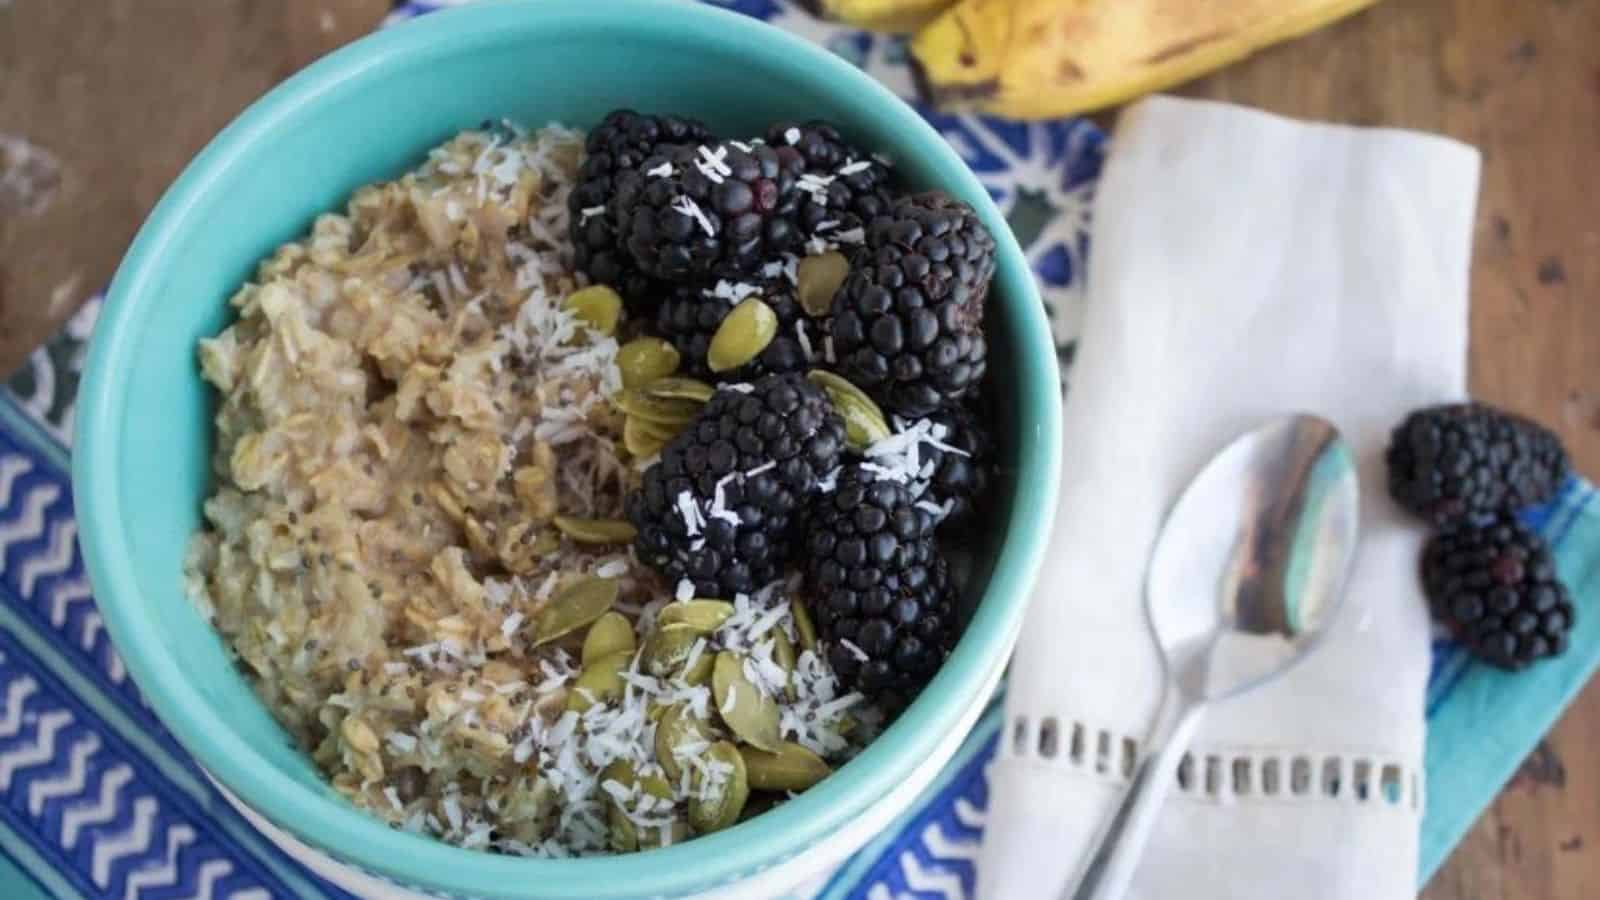 A bowl of banana oatmeal with blackberries, shredded coconut, and pumpkin seeds on top.